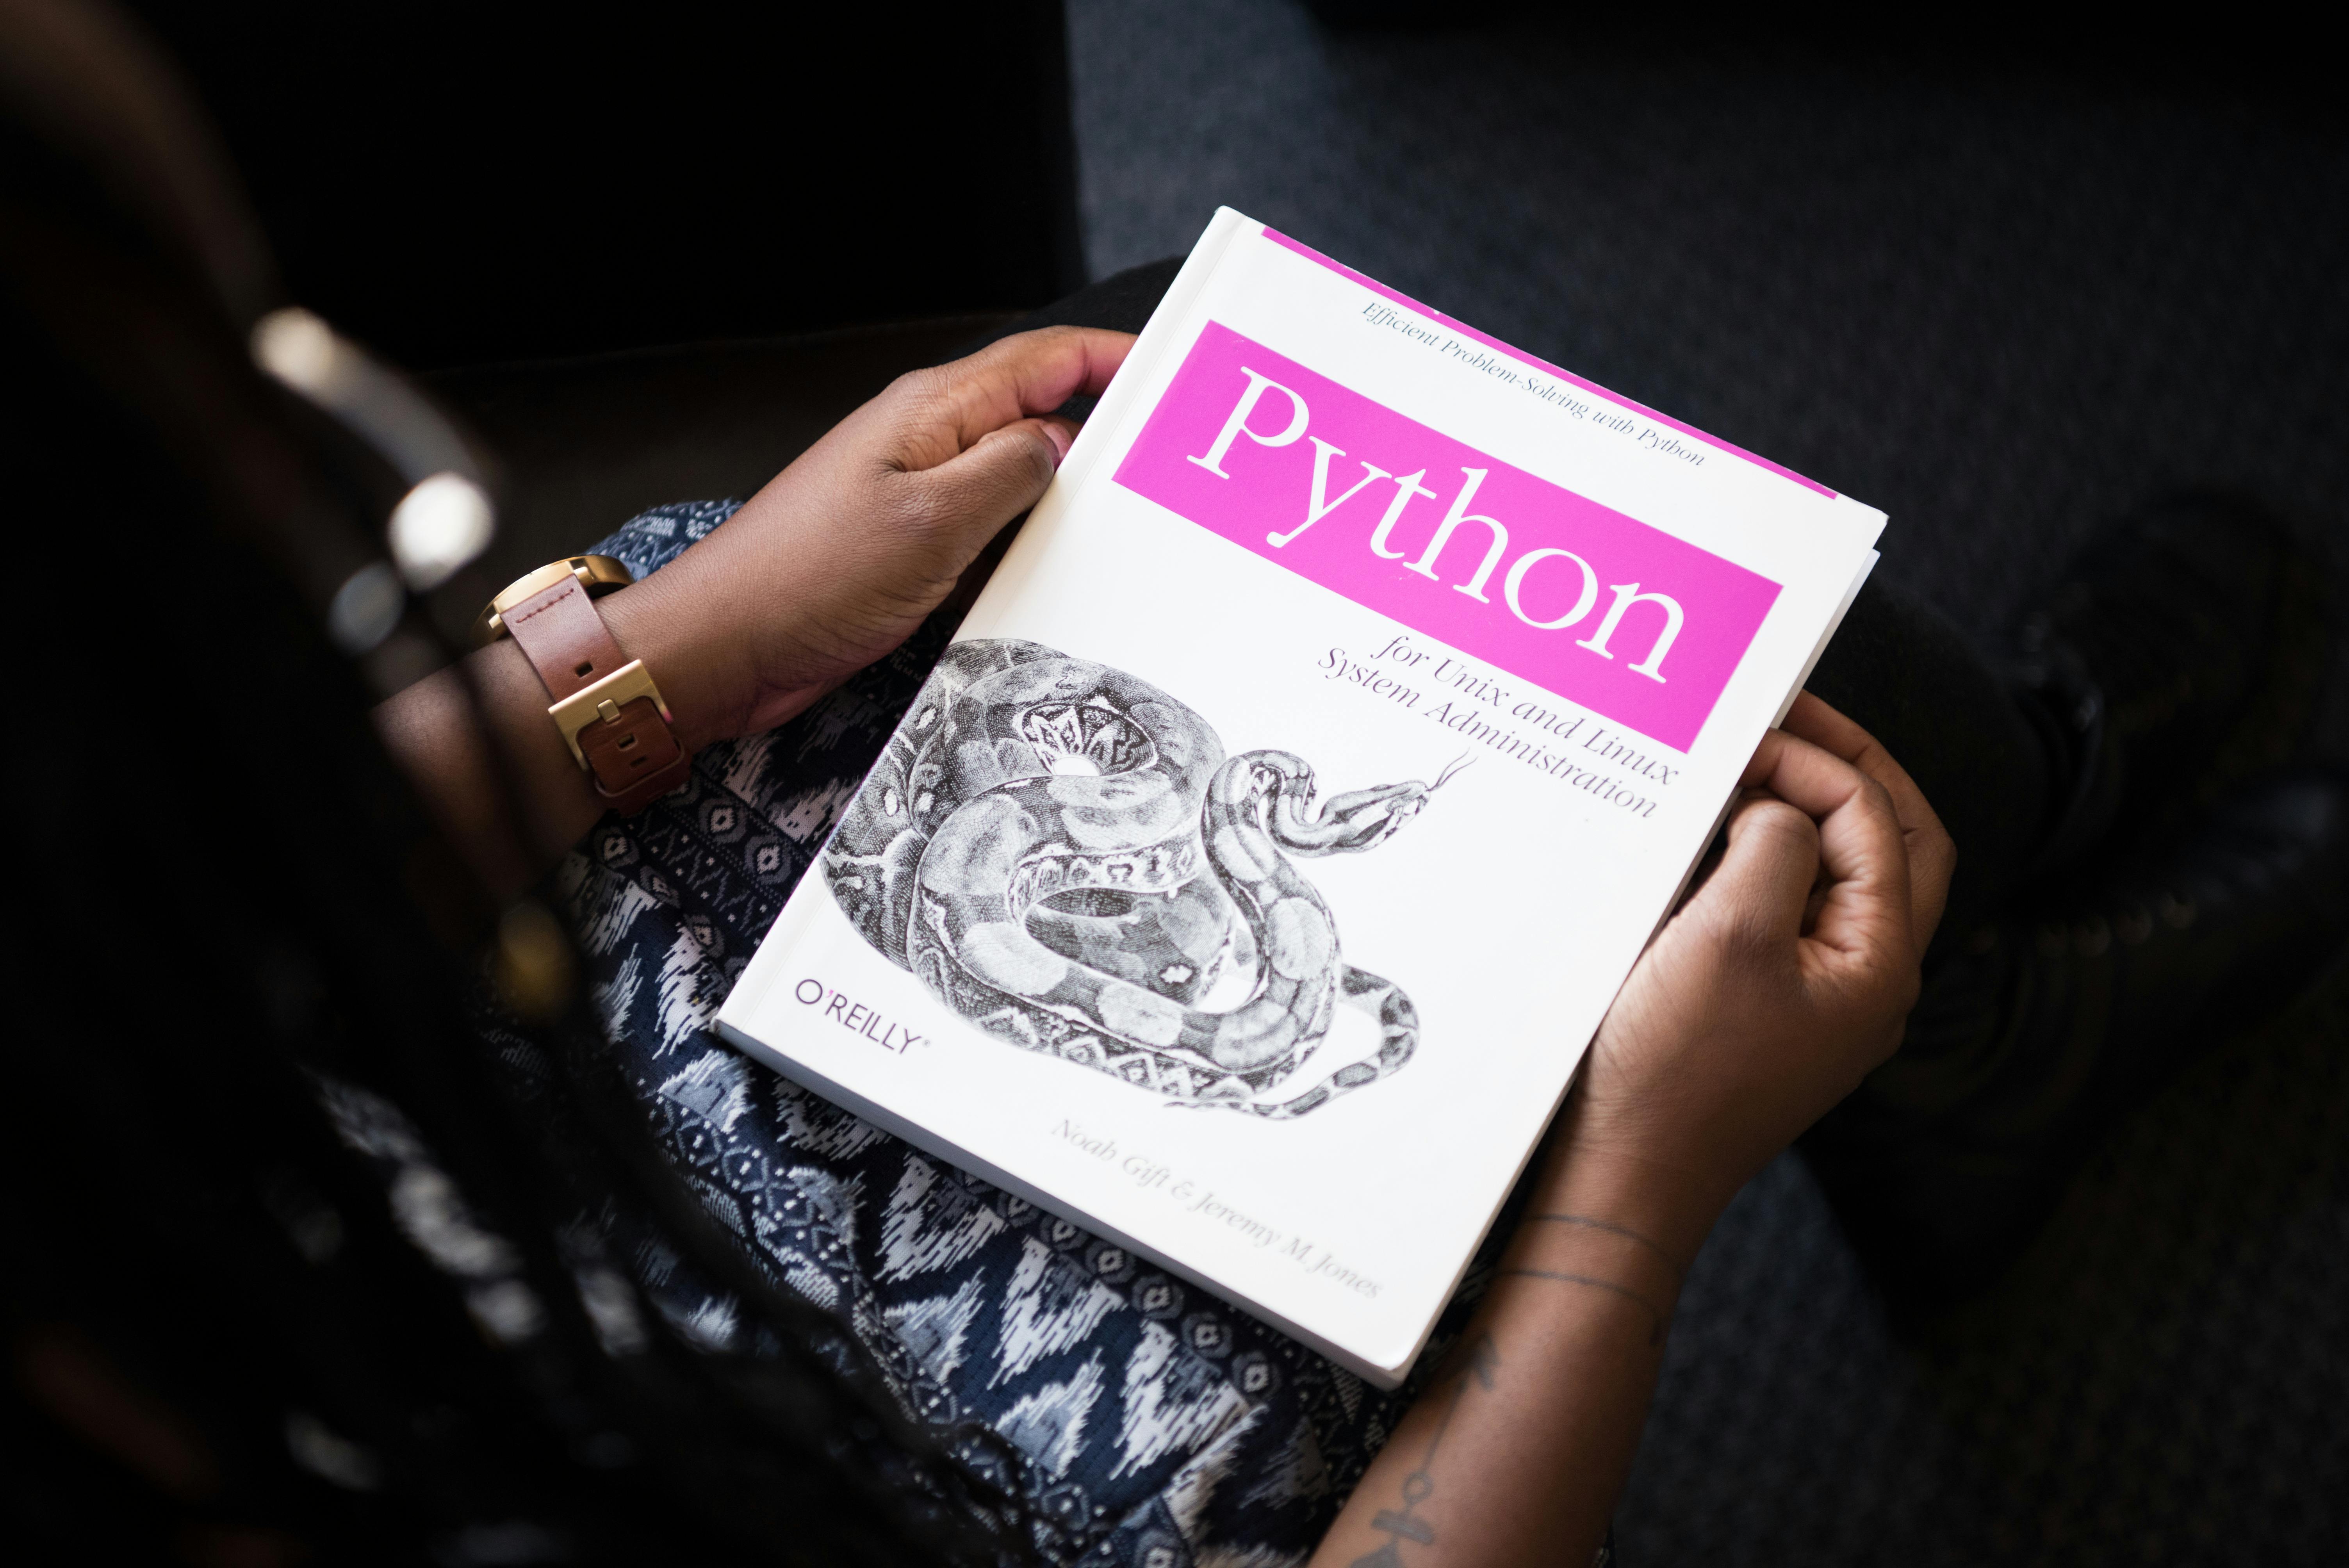 A person holding a Python book titled "Python for Unix and Linux System Administration" by Noah Gift and Jeremy Jones, showcasing the importance of learning best practices for improving Python programming skills.